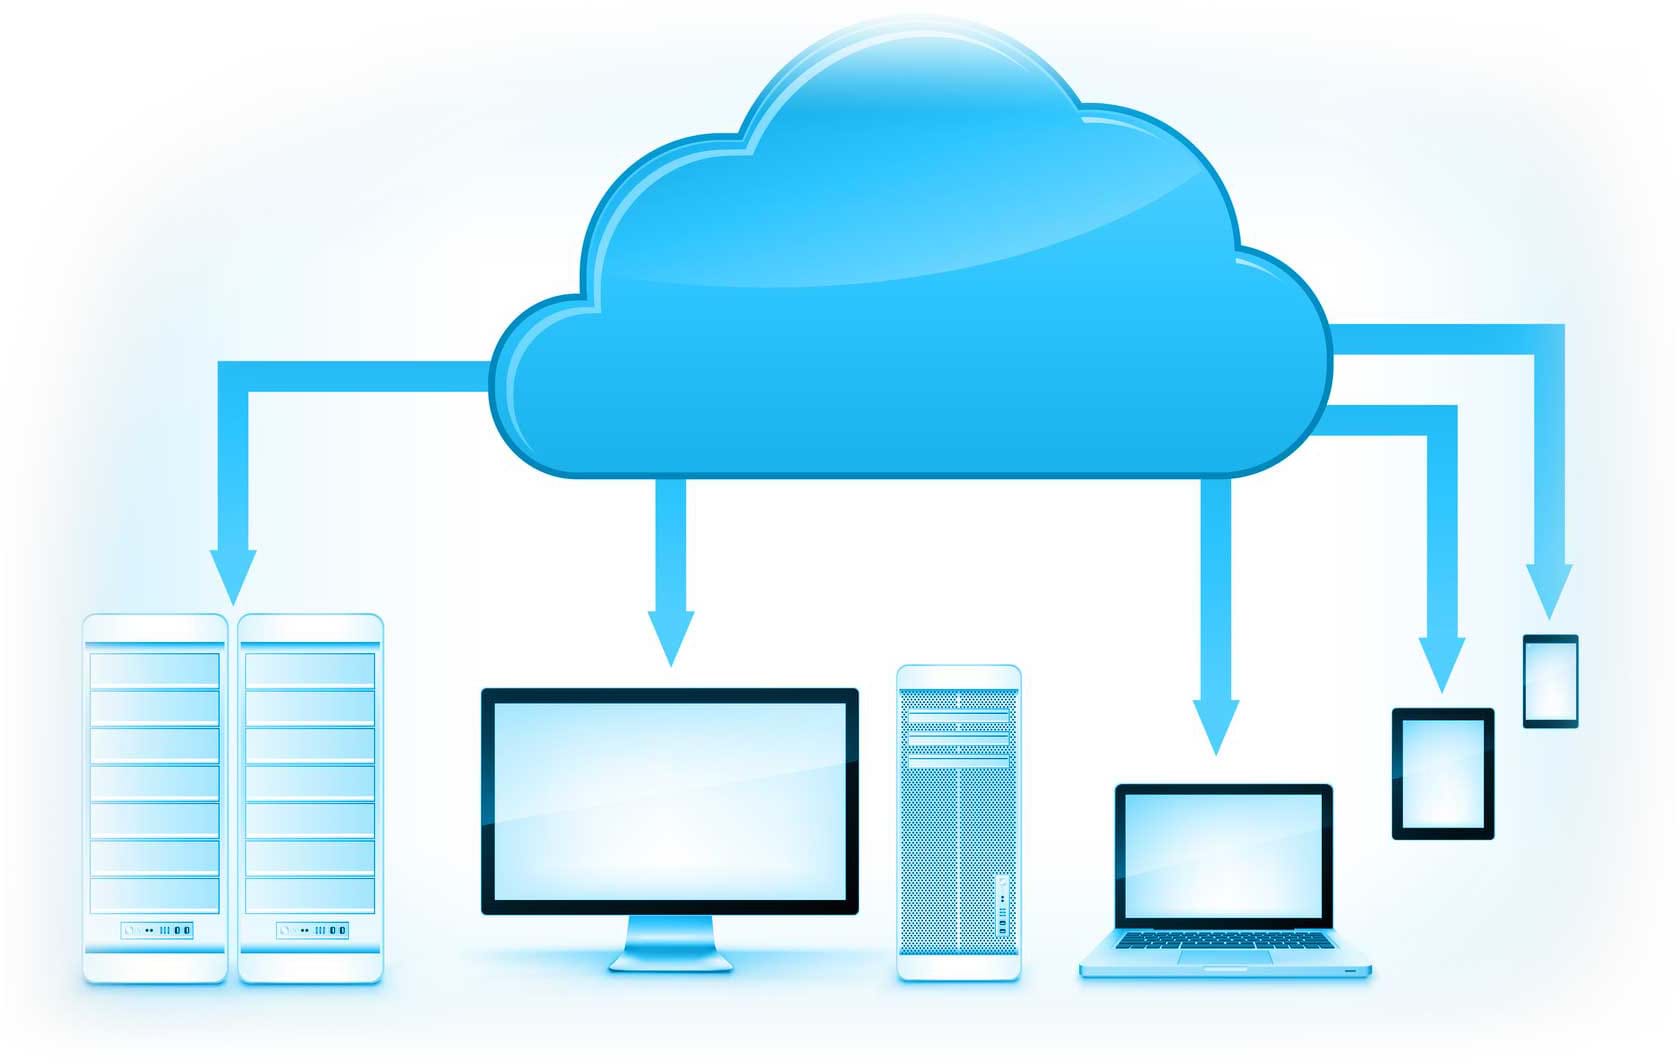 Managed Cloud Solution with Arrows Pointing to Computer and Mobile Devices